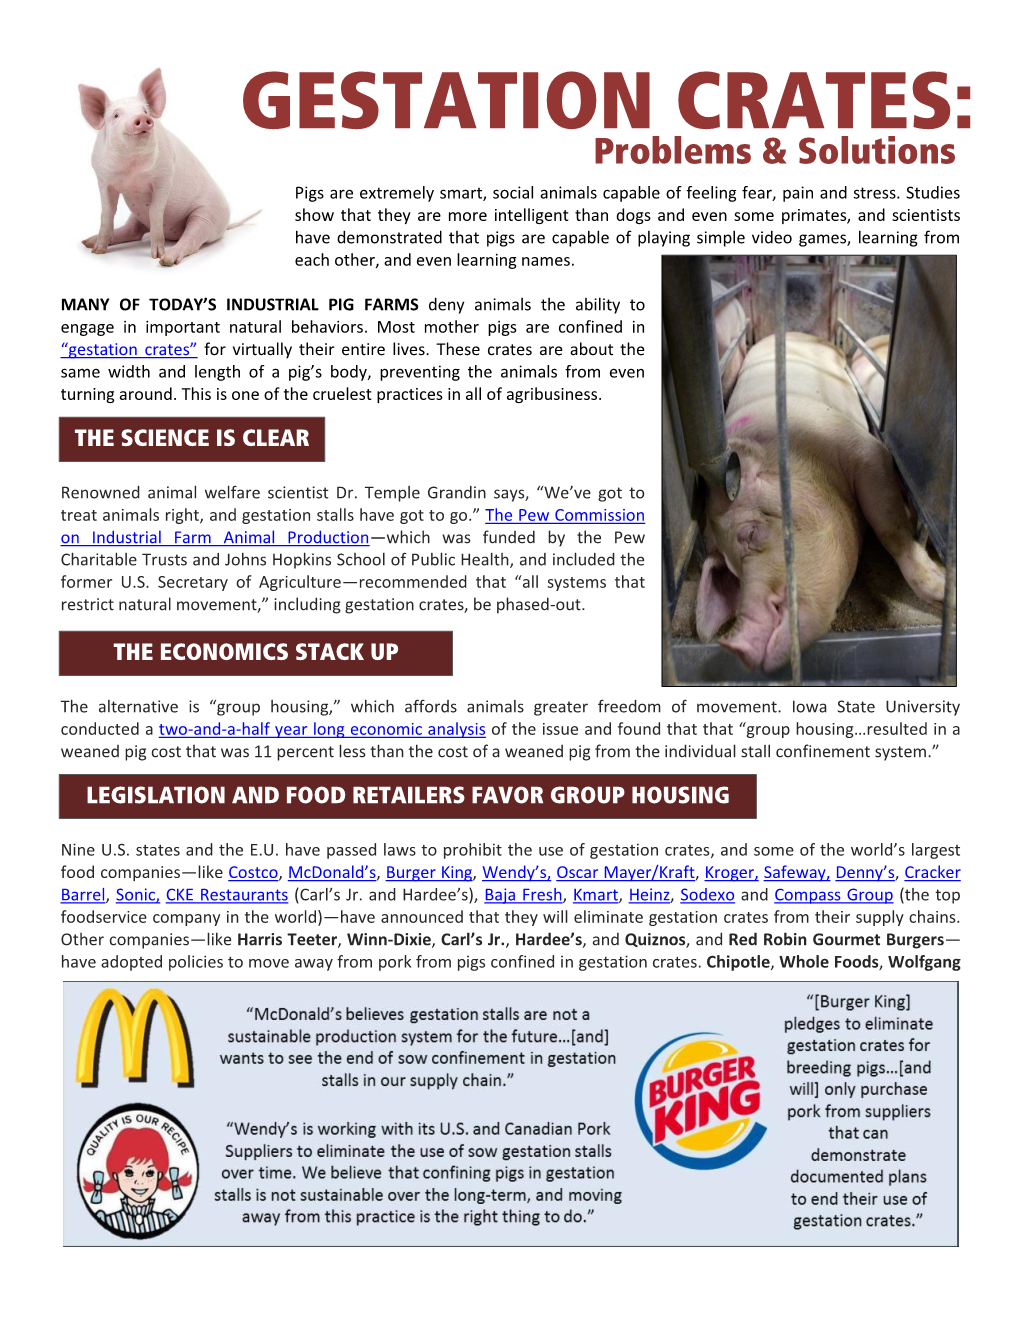 GESTATION CRATES: Problems & Solutions